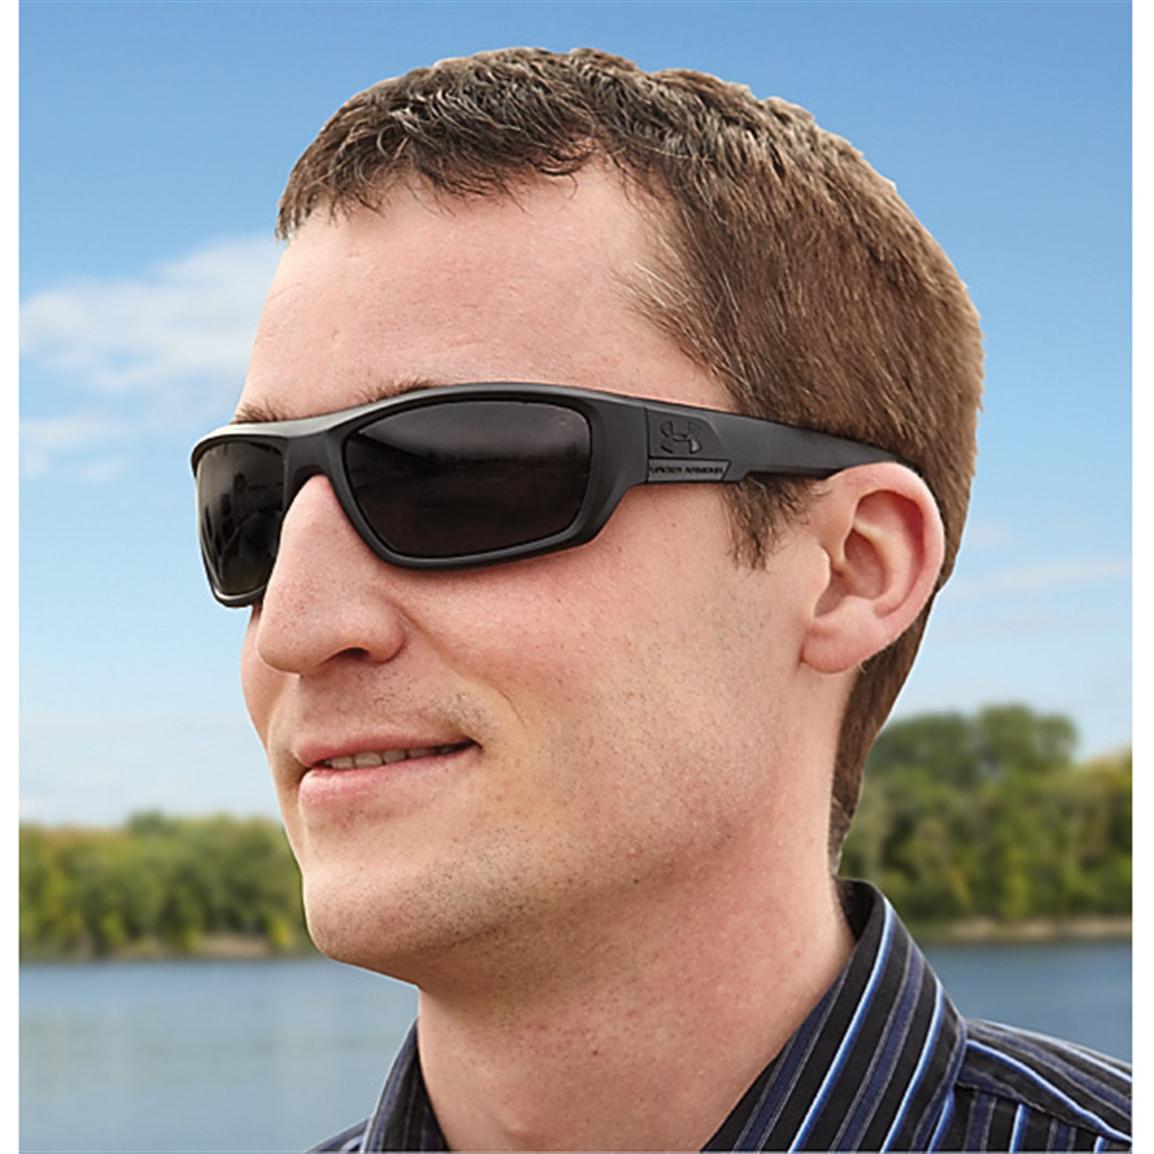 under armour prevail sunglasses review 